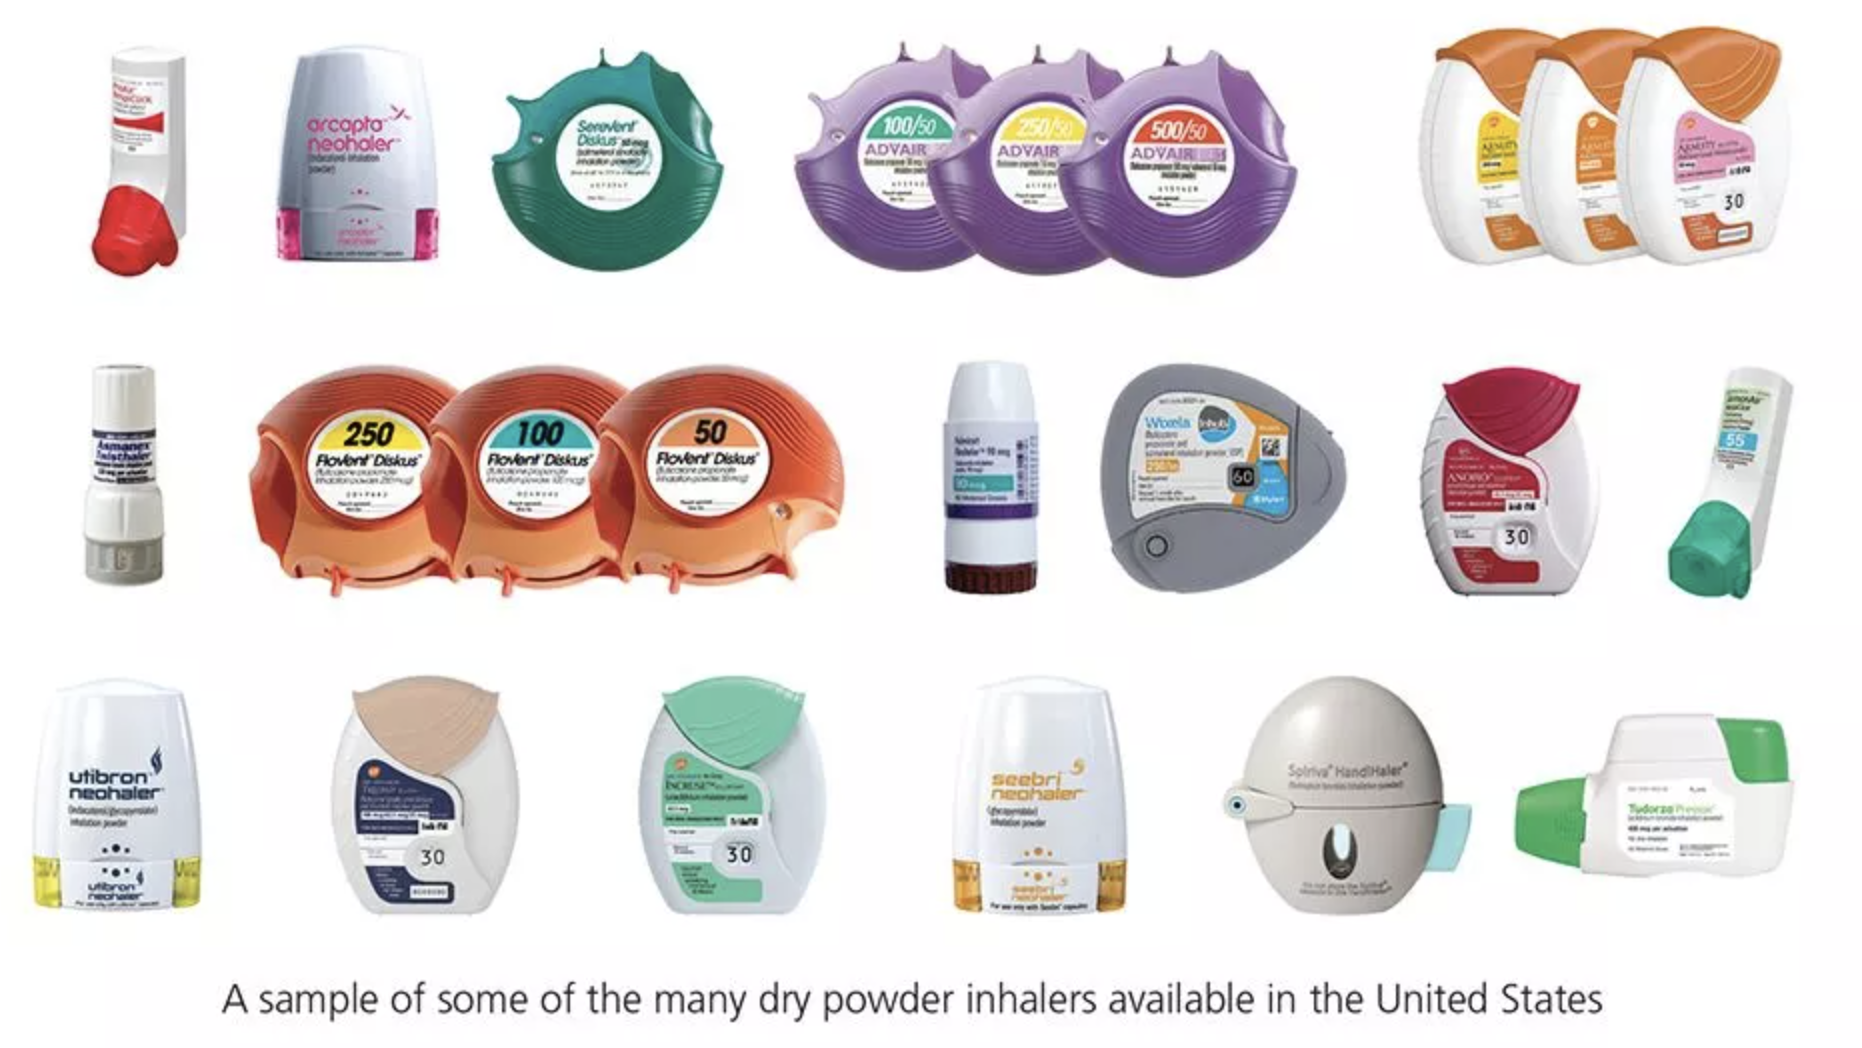 photo of some of the many different types of Dry powder inhalers available in the US